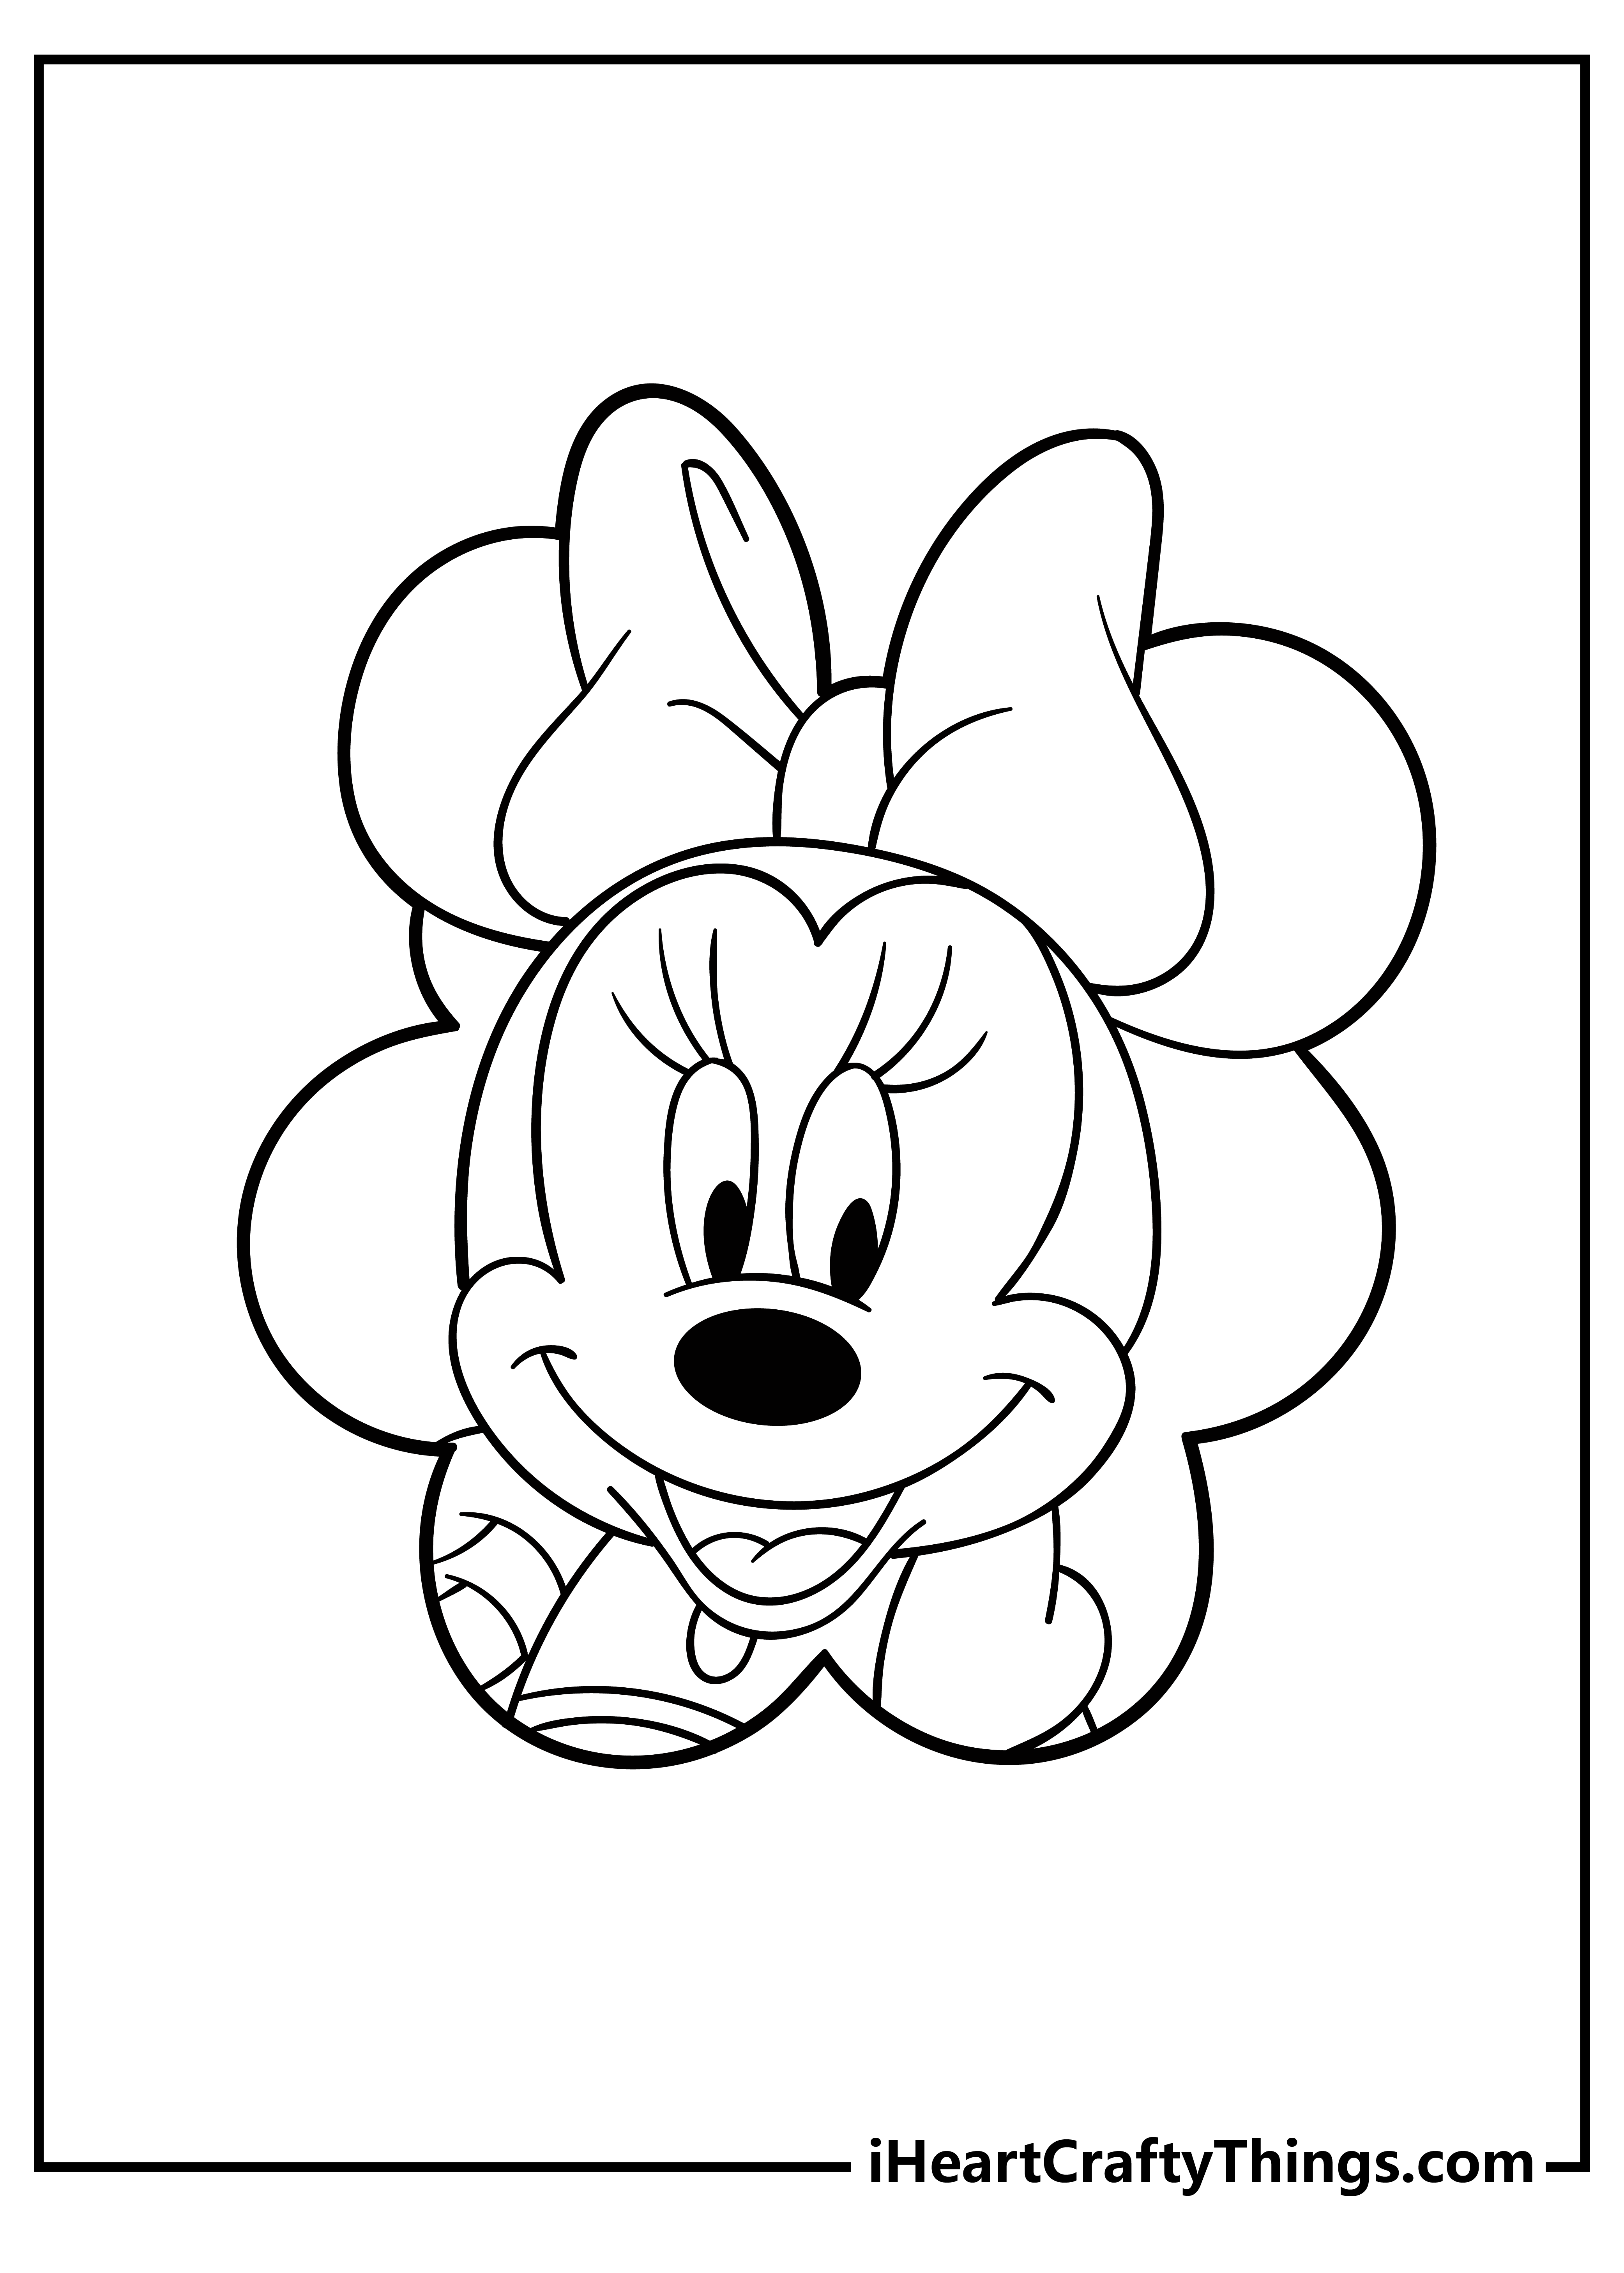 How to draw the face of Minnie Mouse (front view) - Sketchok